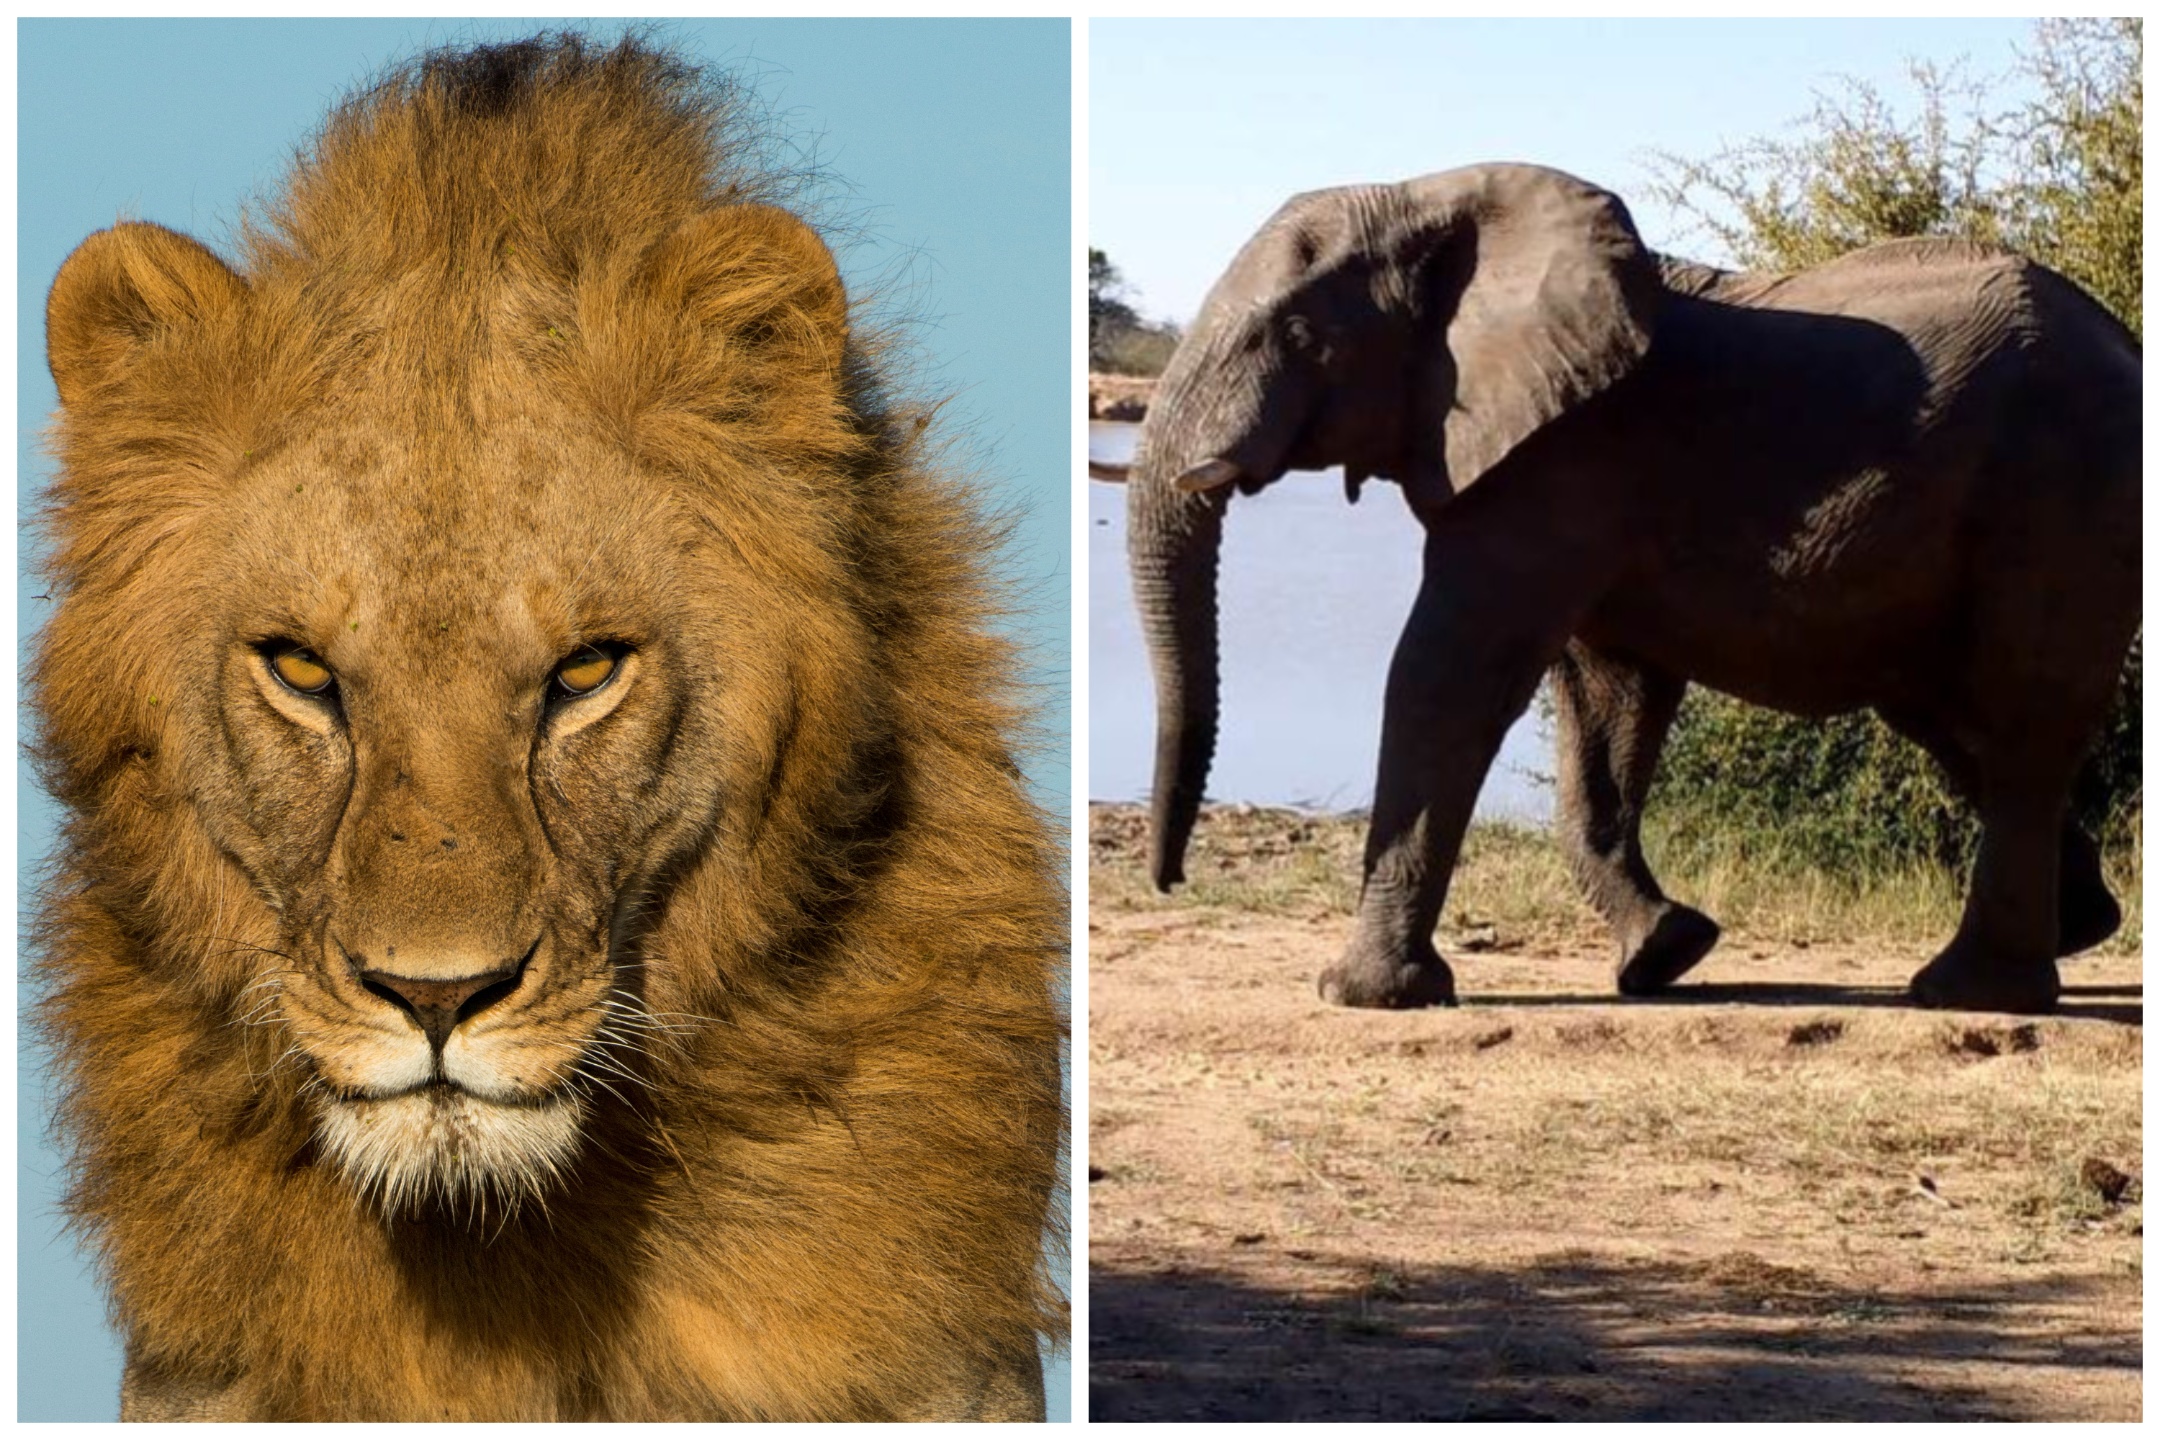 Elephants and Rhinos Are Far Extra Afraid of People Than Lions, Research Finds